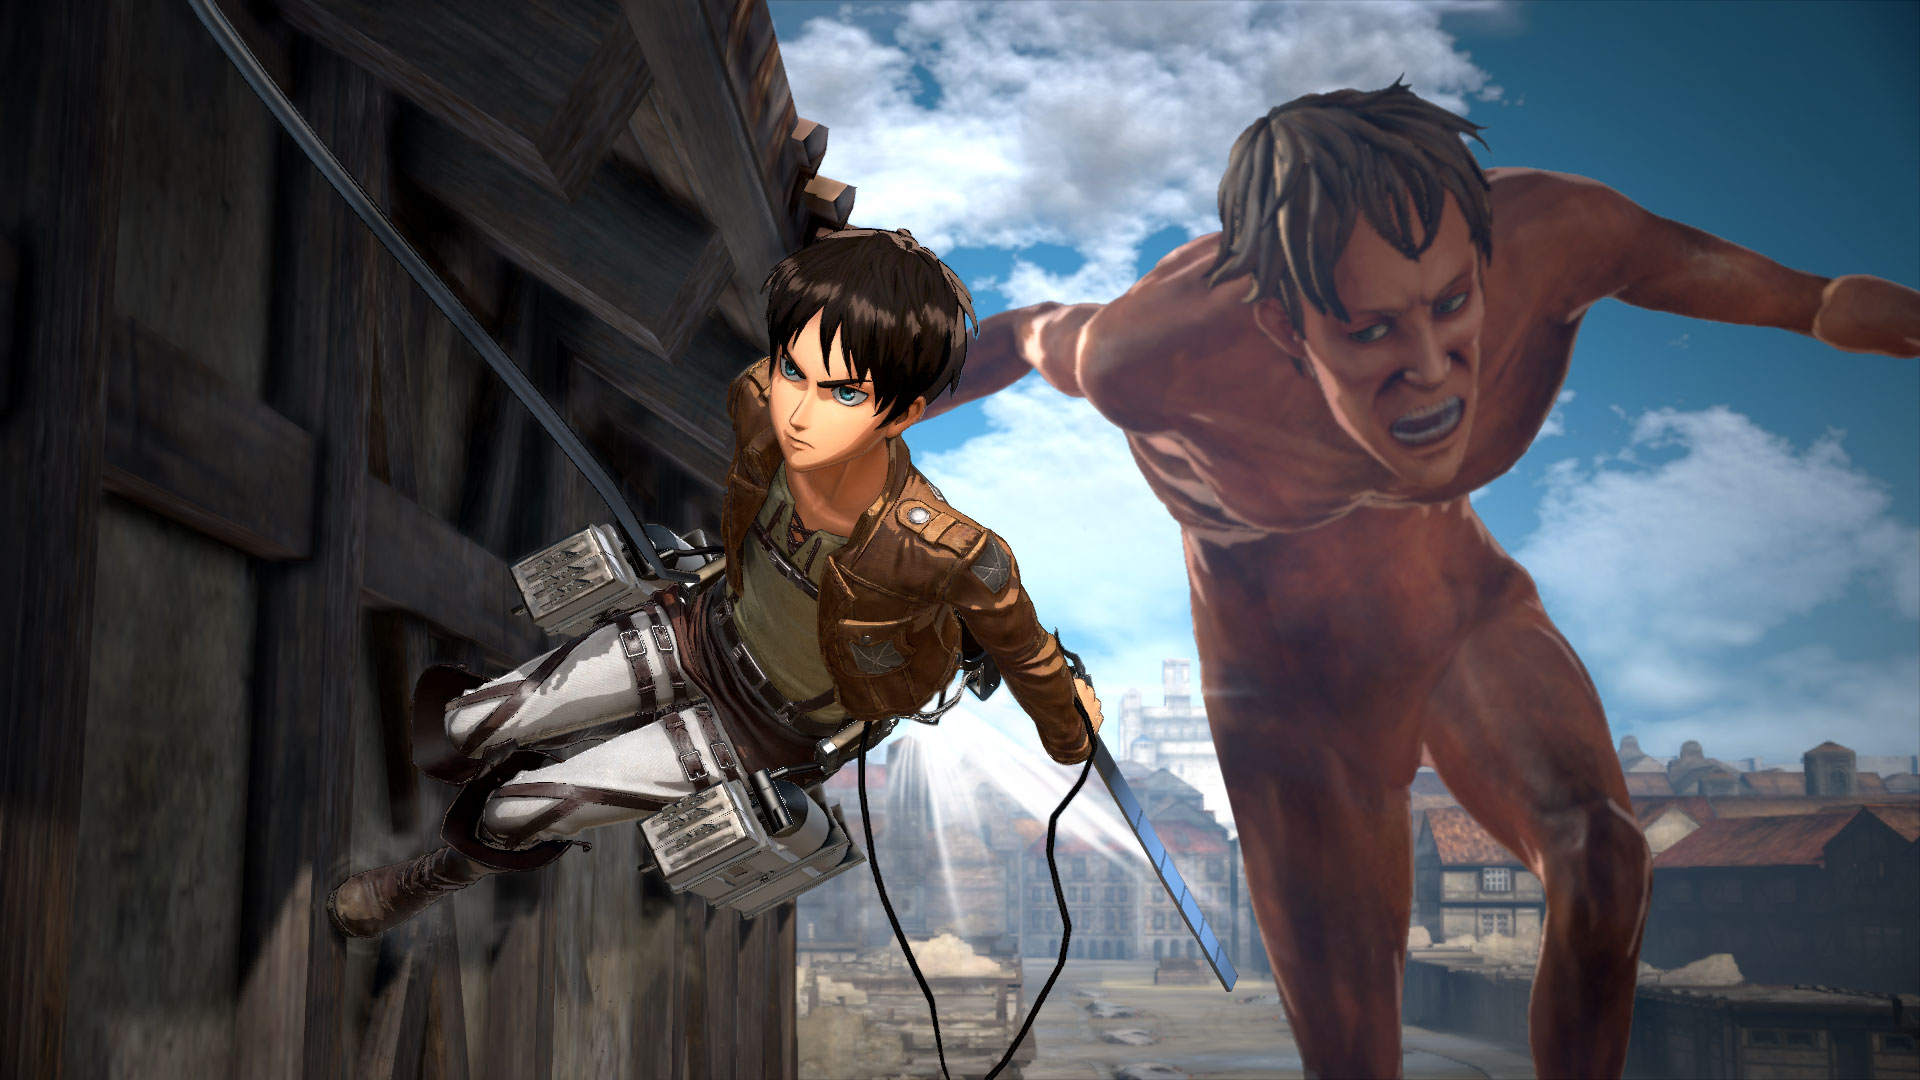 attack on titan game online free download